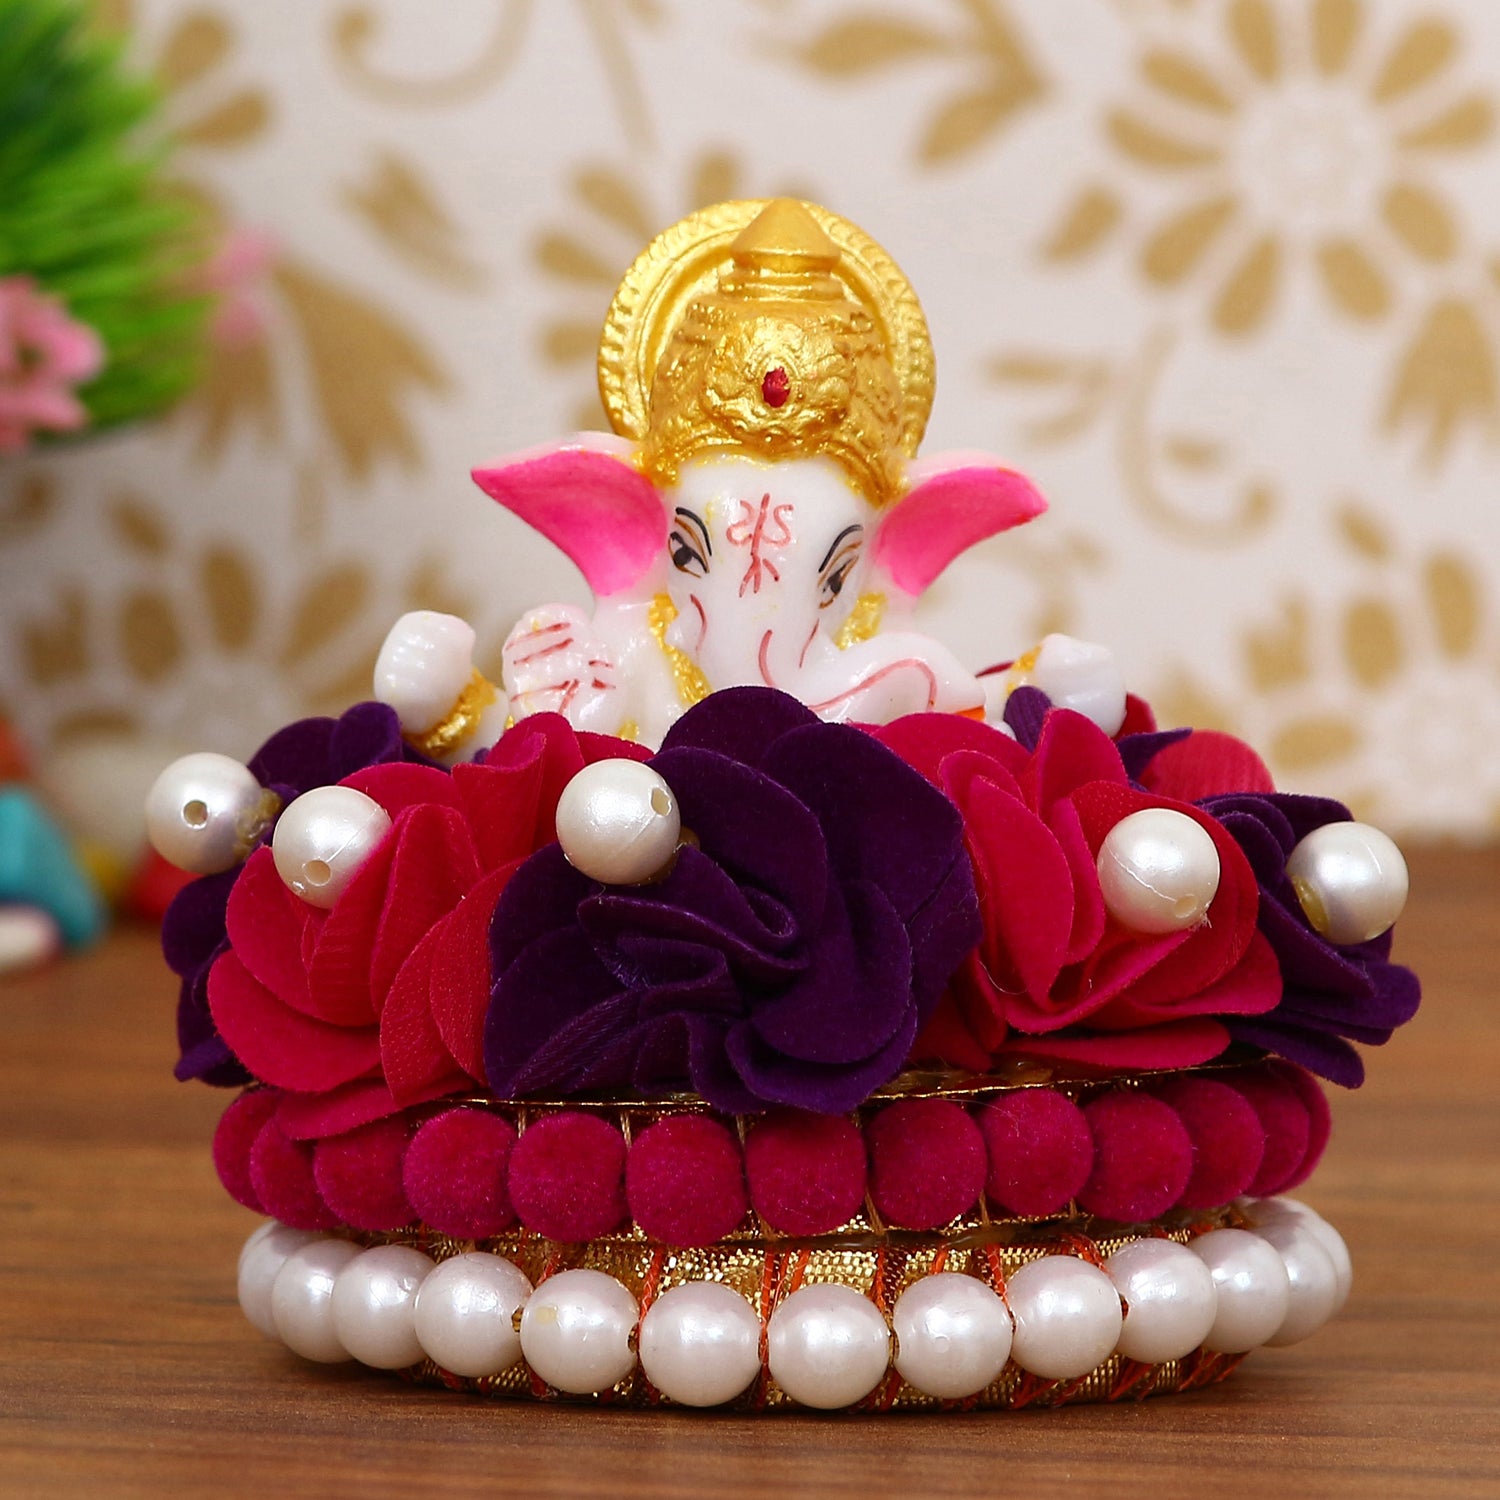 Lord Ganesha Idol On Decorative Handcrafted Red And Purple Flowers Plate